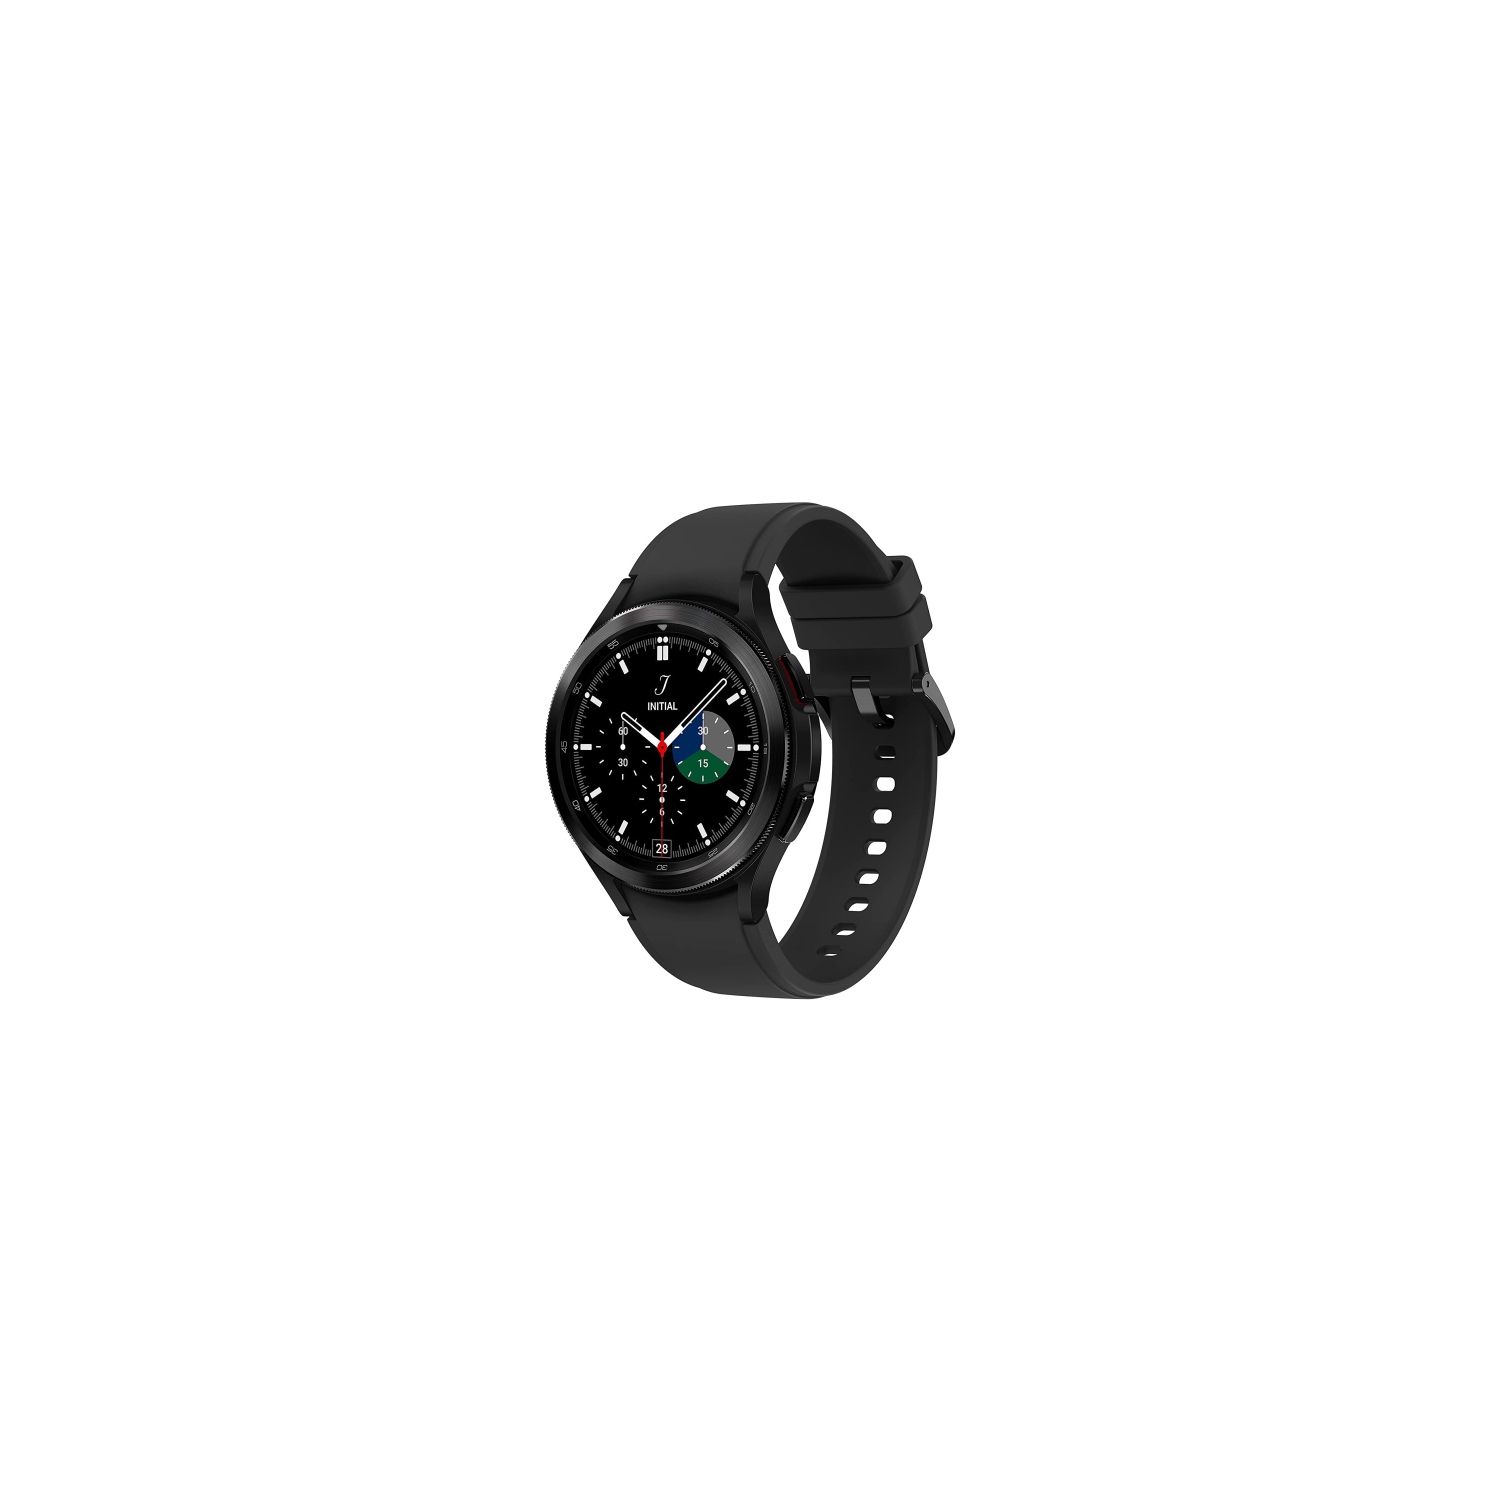 Samsung Galaxy Watch4 Classic 46mm (LTE) Smartwatch with Heart Rate Monitor - Black